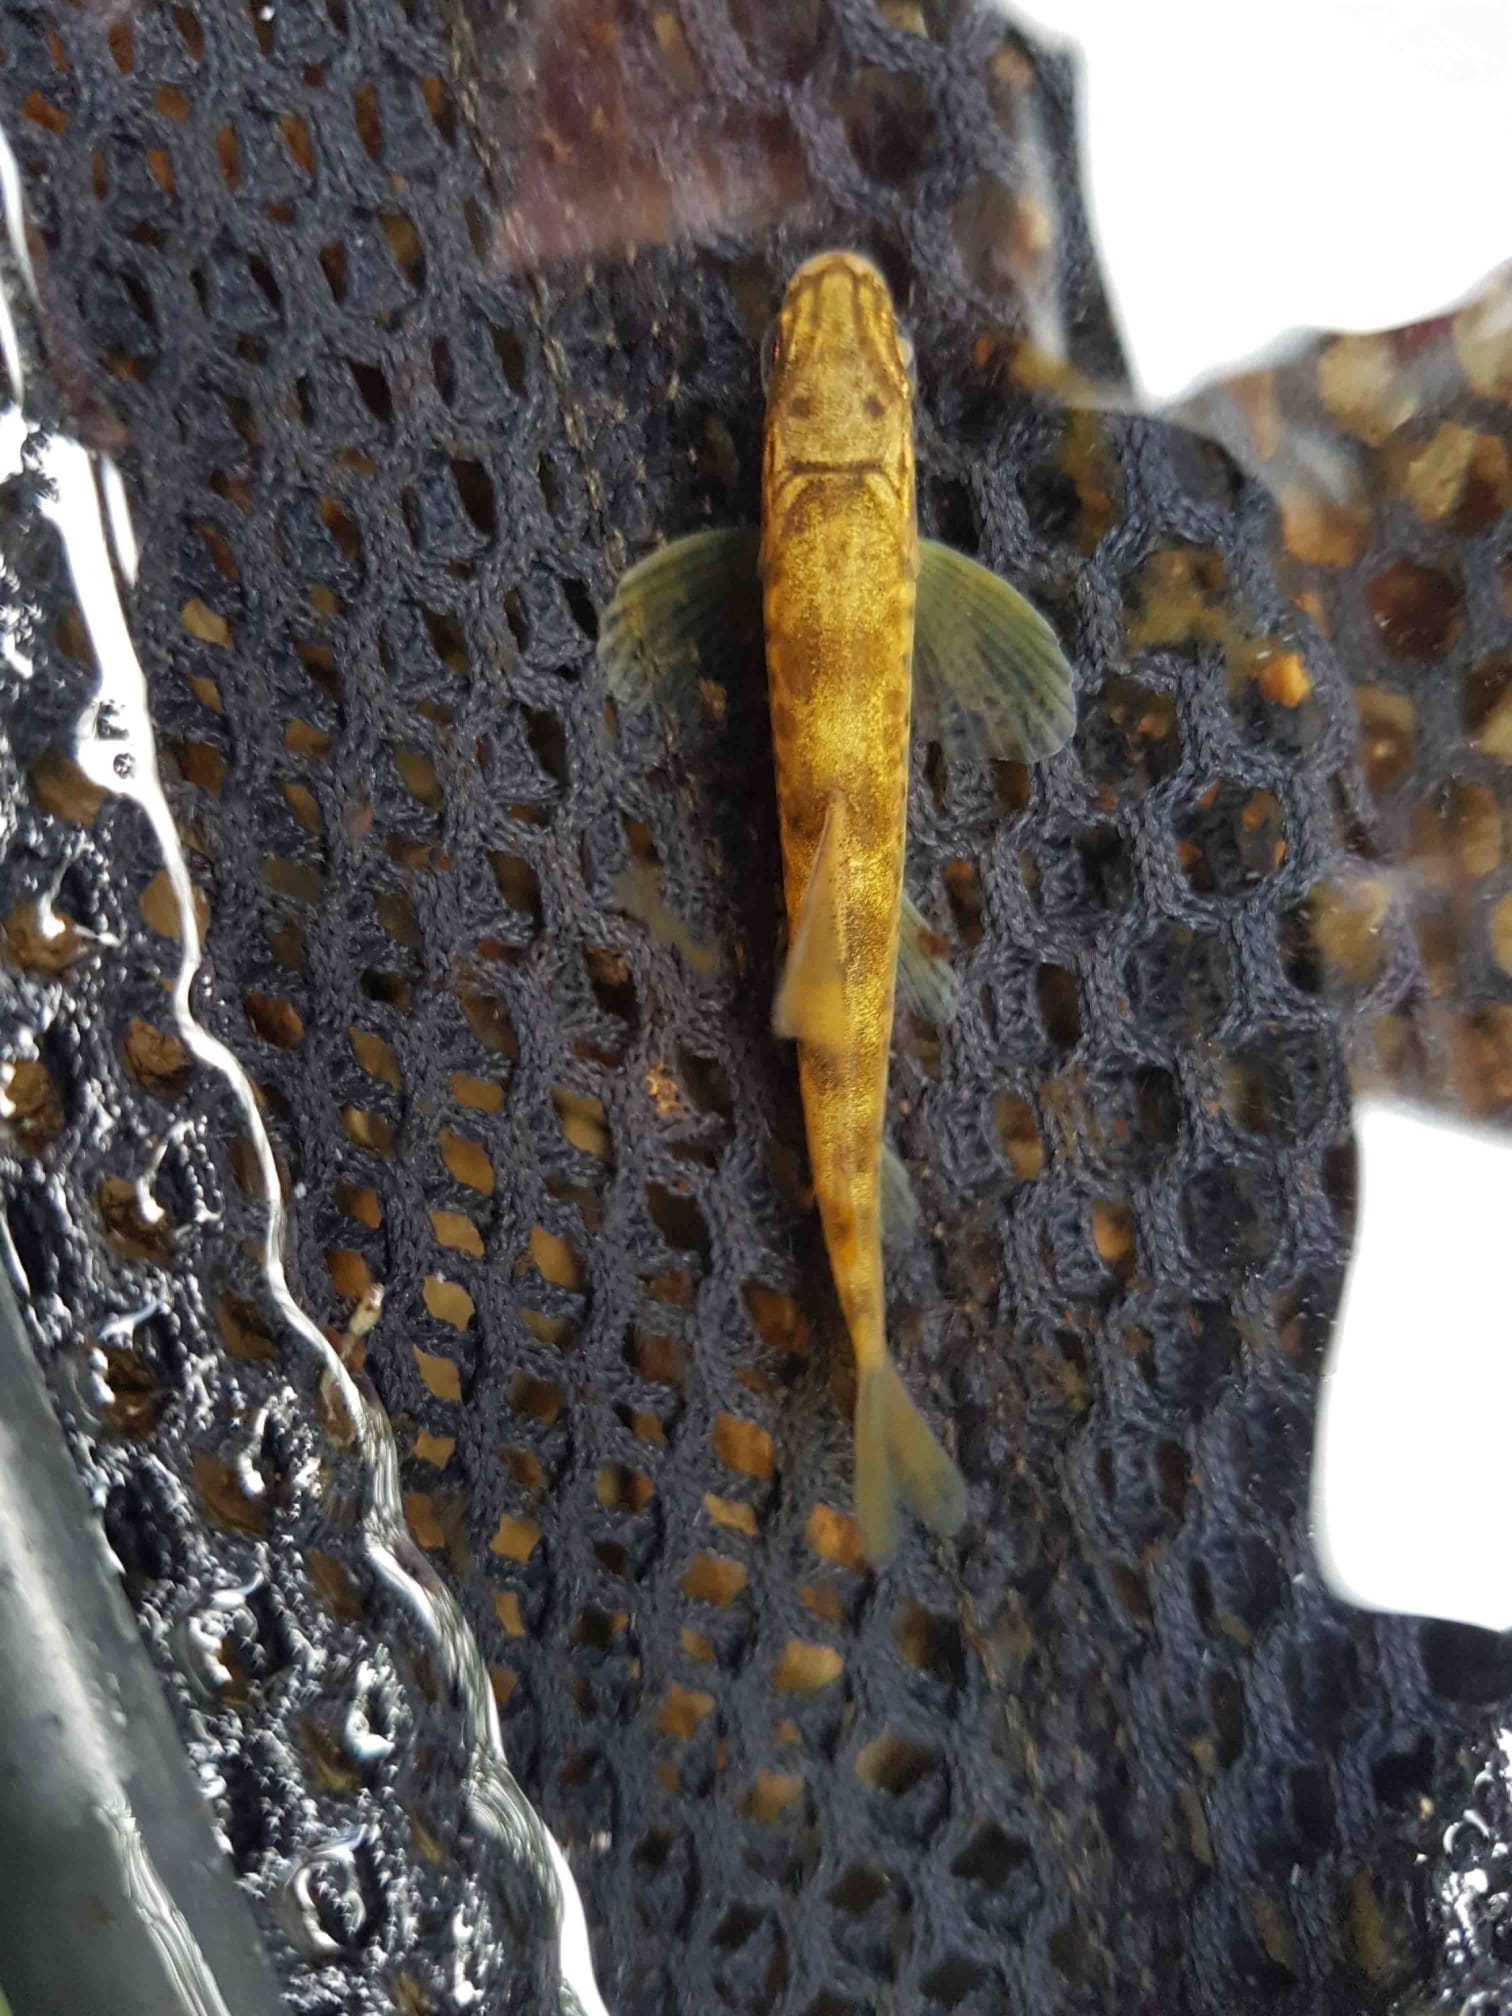 One of the salmon fry found in the newly gravelled areas